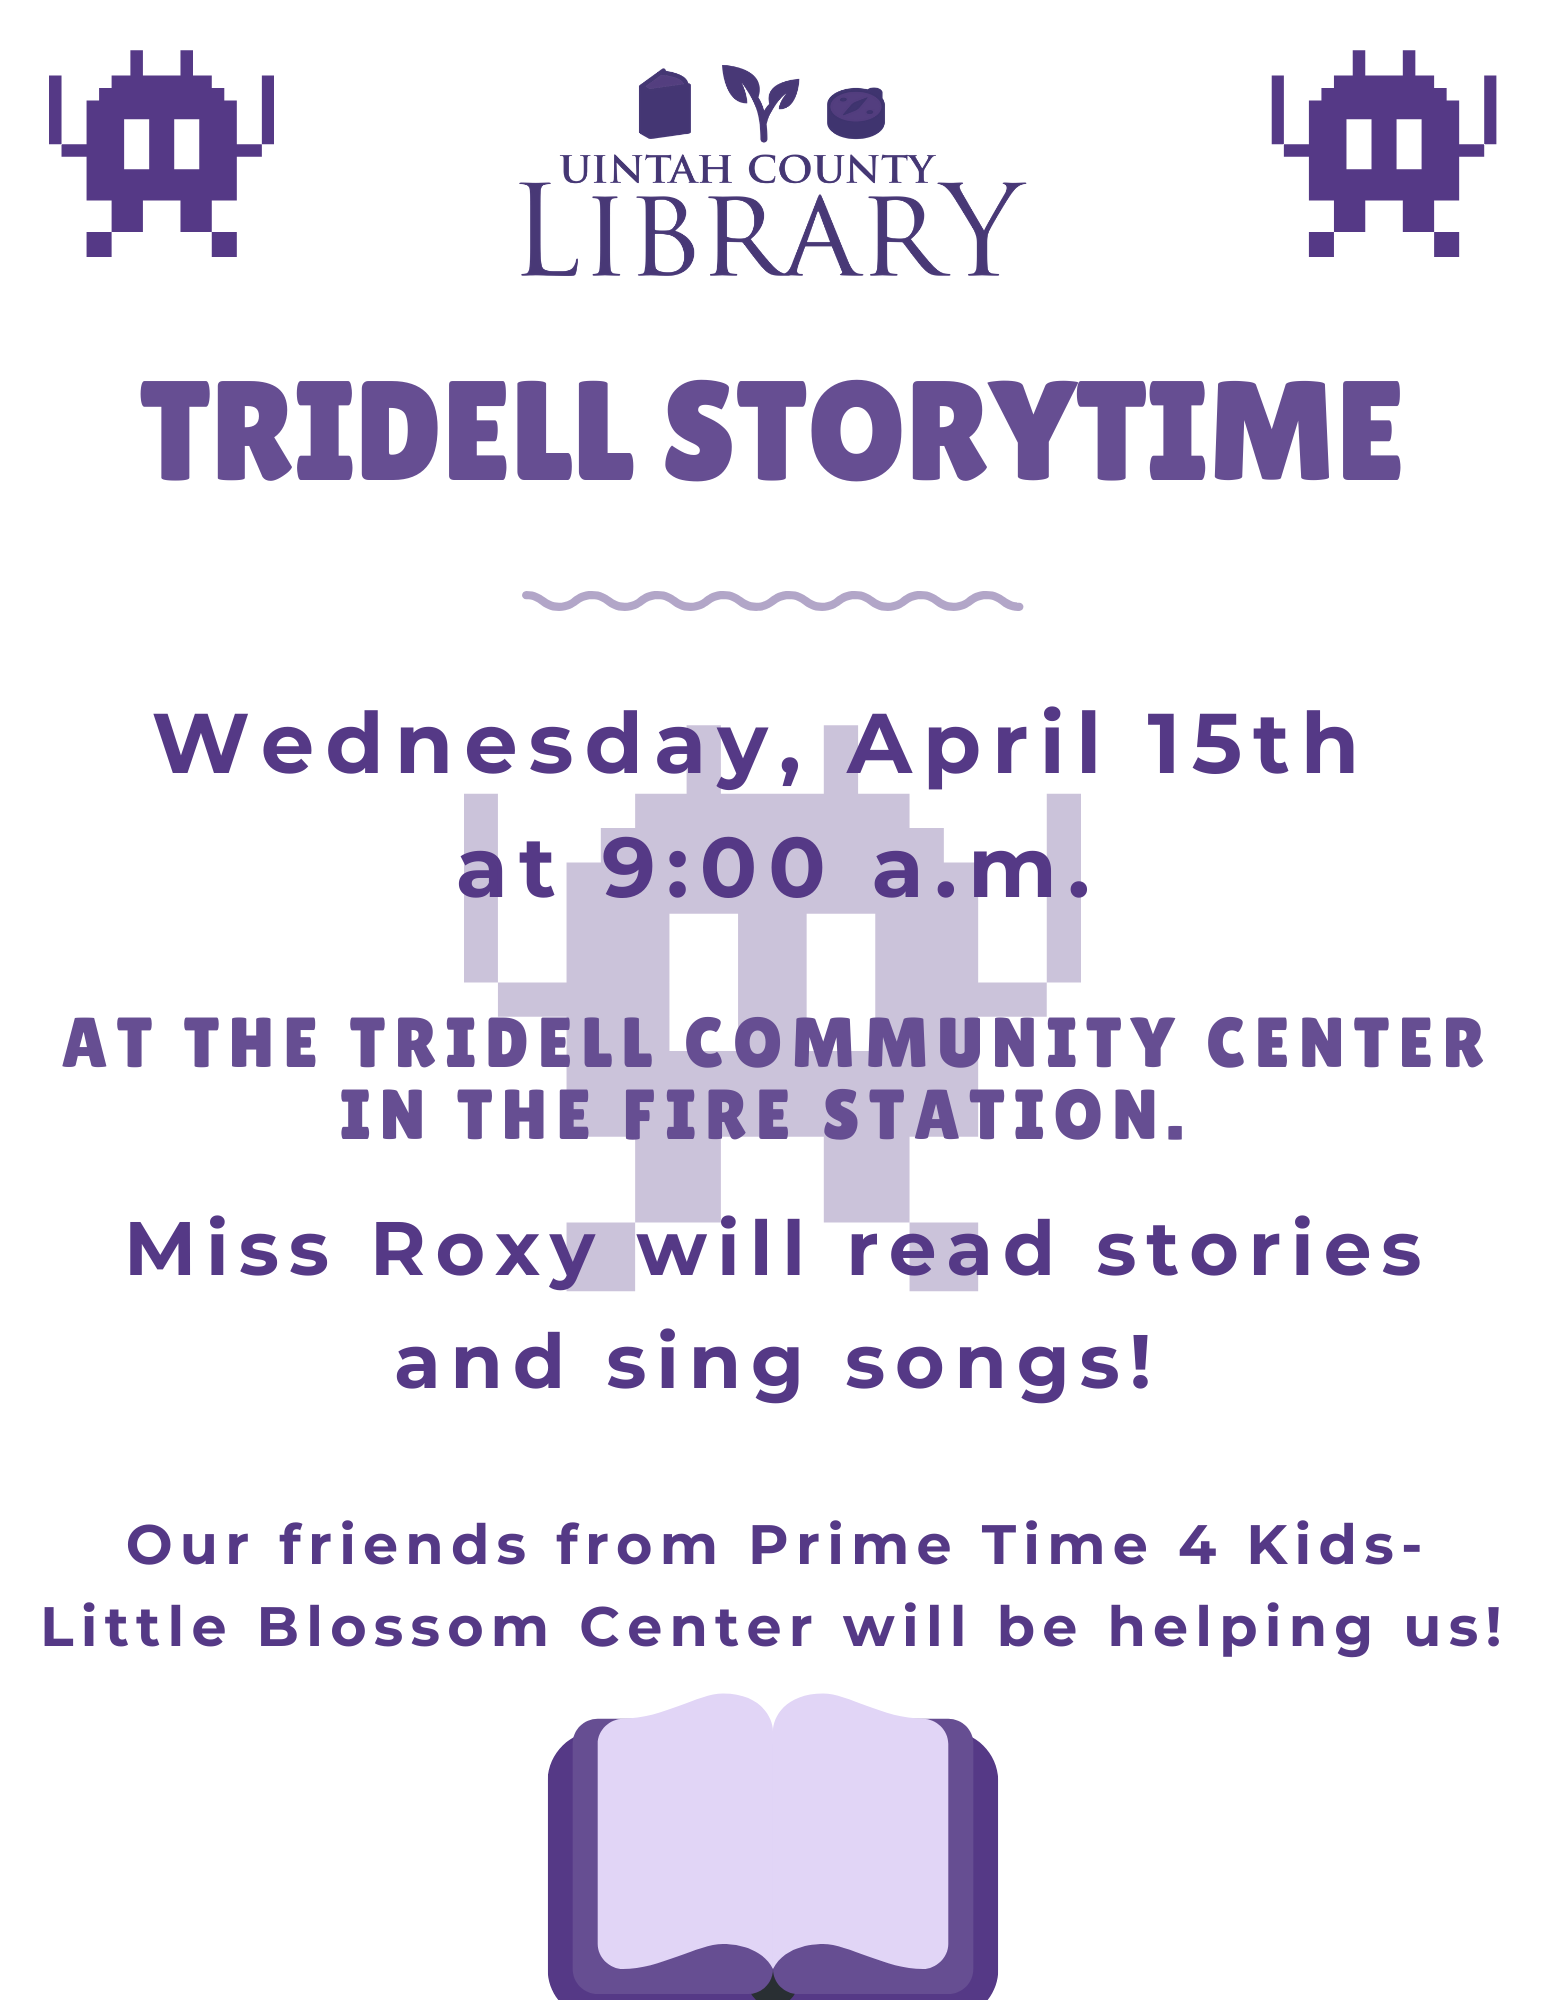 Uintah County Library: Tridell Storytime on Wednesday, April 15th at 9:00 a.m. at the Tridell Community Center in the Fire Station. Miss Roxy will read stories and sing songs! Our friends at Prime Time 4 Kids-Little Blossom Center will be helping us! 